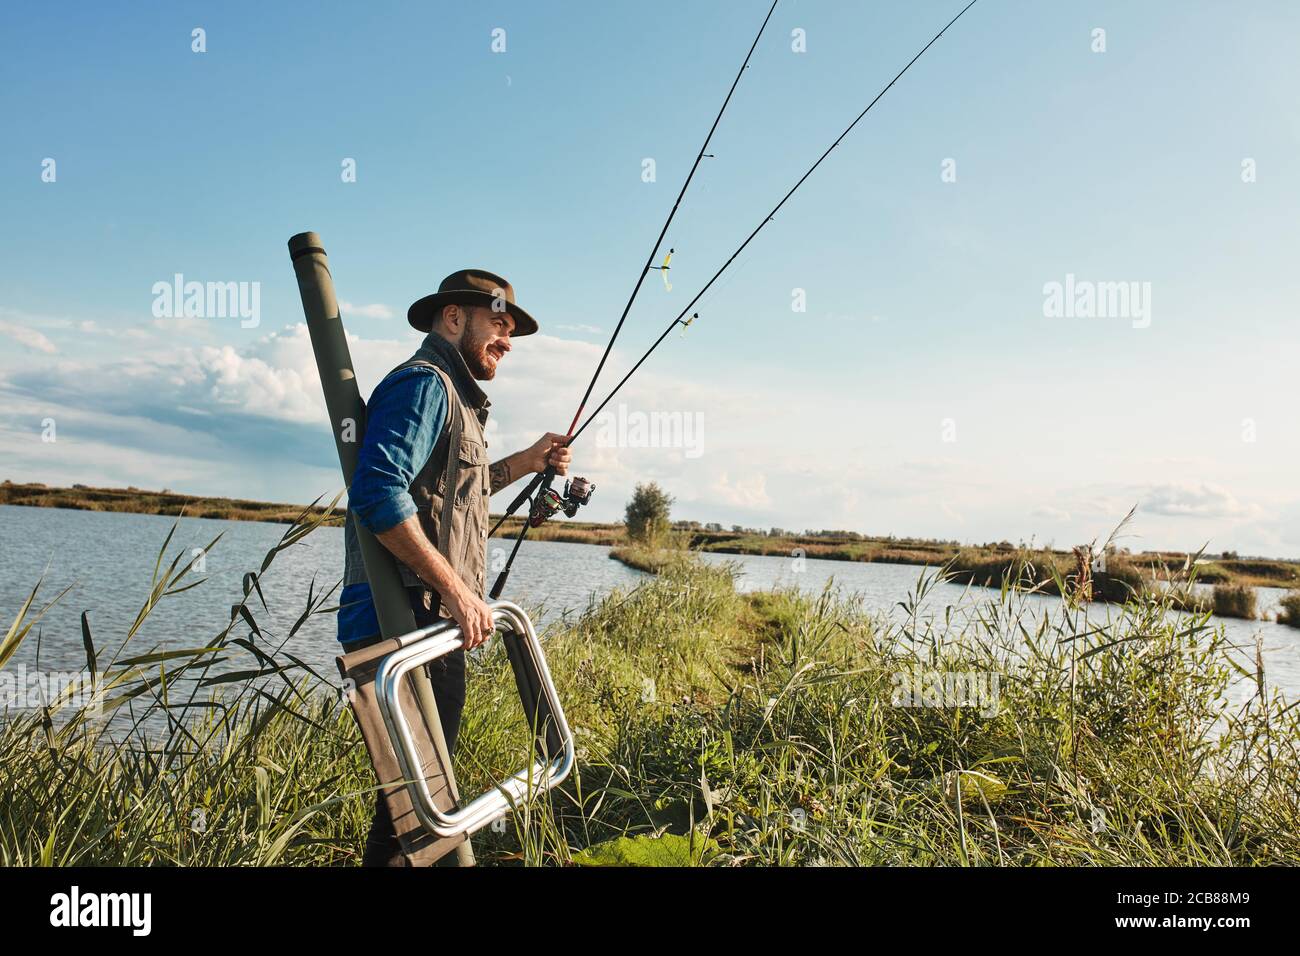 https://c8.alamy.com/comp/2CB88M9/adult-caucasian-fisherman-inspects-place-for-fishing-hold-tackle-fishing-stool-warm-and-sunny-day-background-blue-lake-2CB88M9.jpg